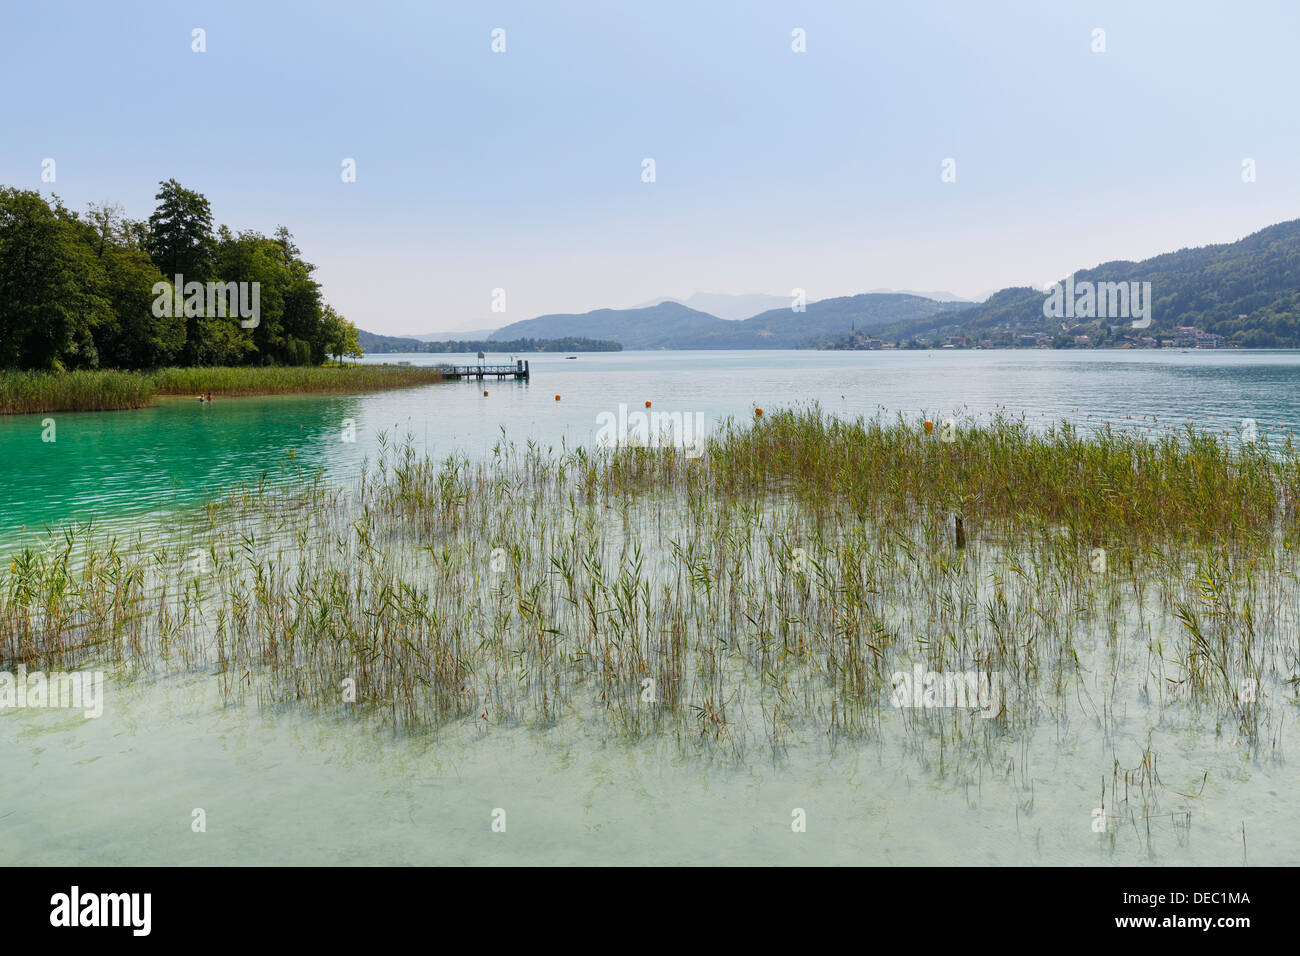 Reeds on the shore of Lake Woerthersee, Pörtschach am Wörther See, Carinthia, Austria Stock Photo